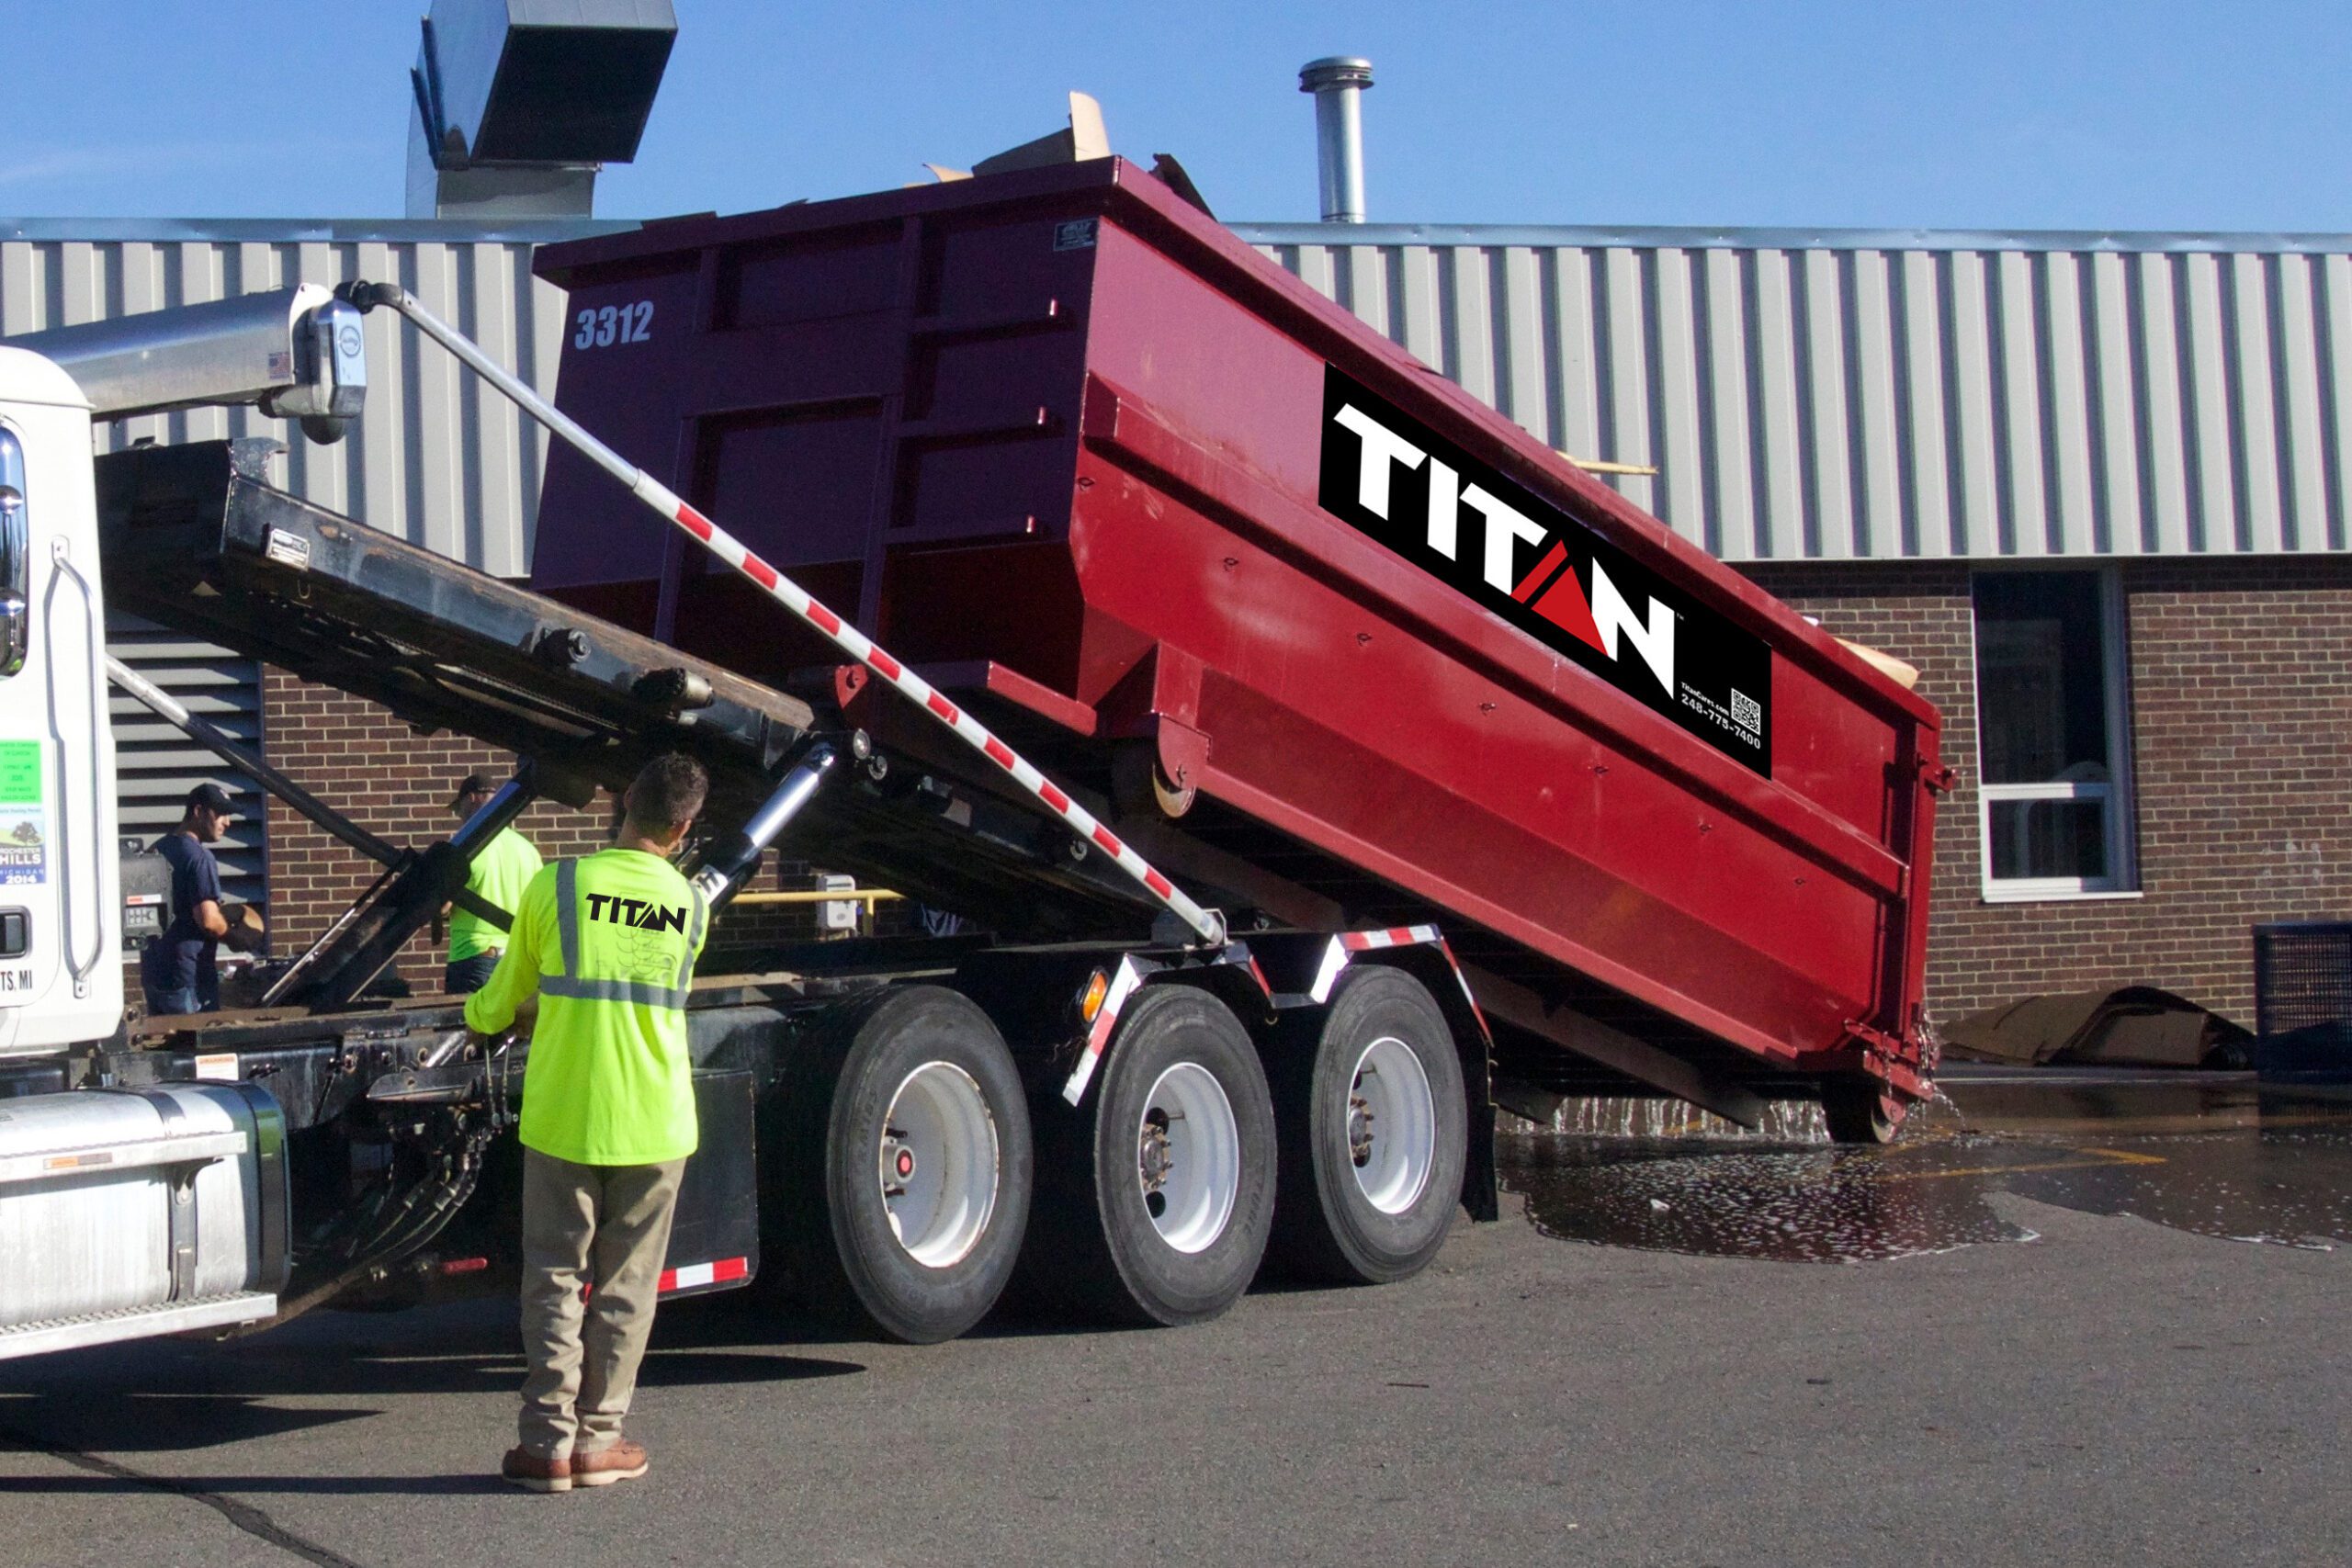 Titan Dumpster Rental Being Dropped Off at Customer